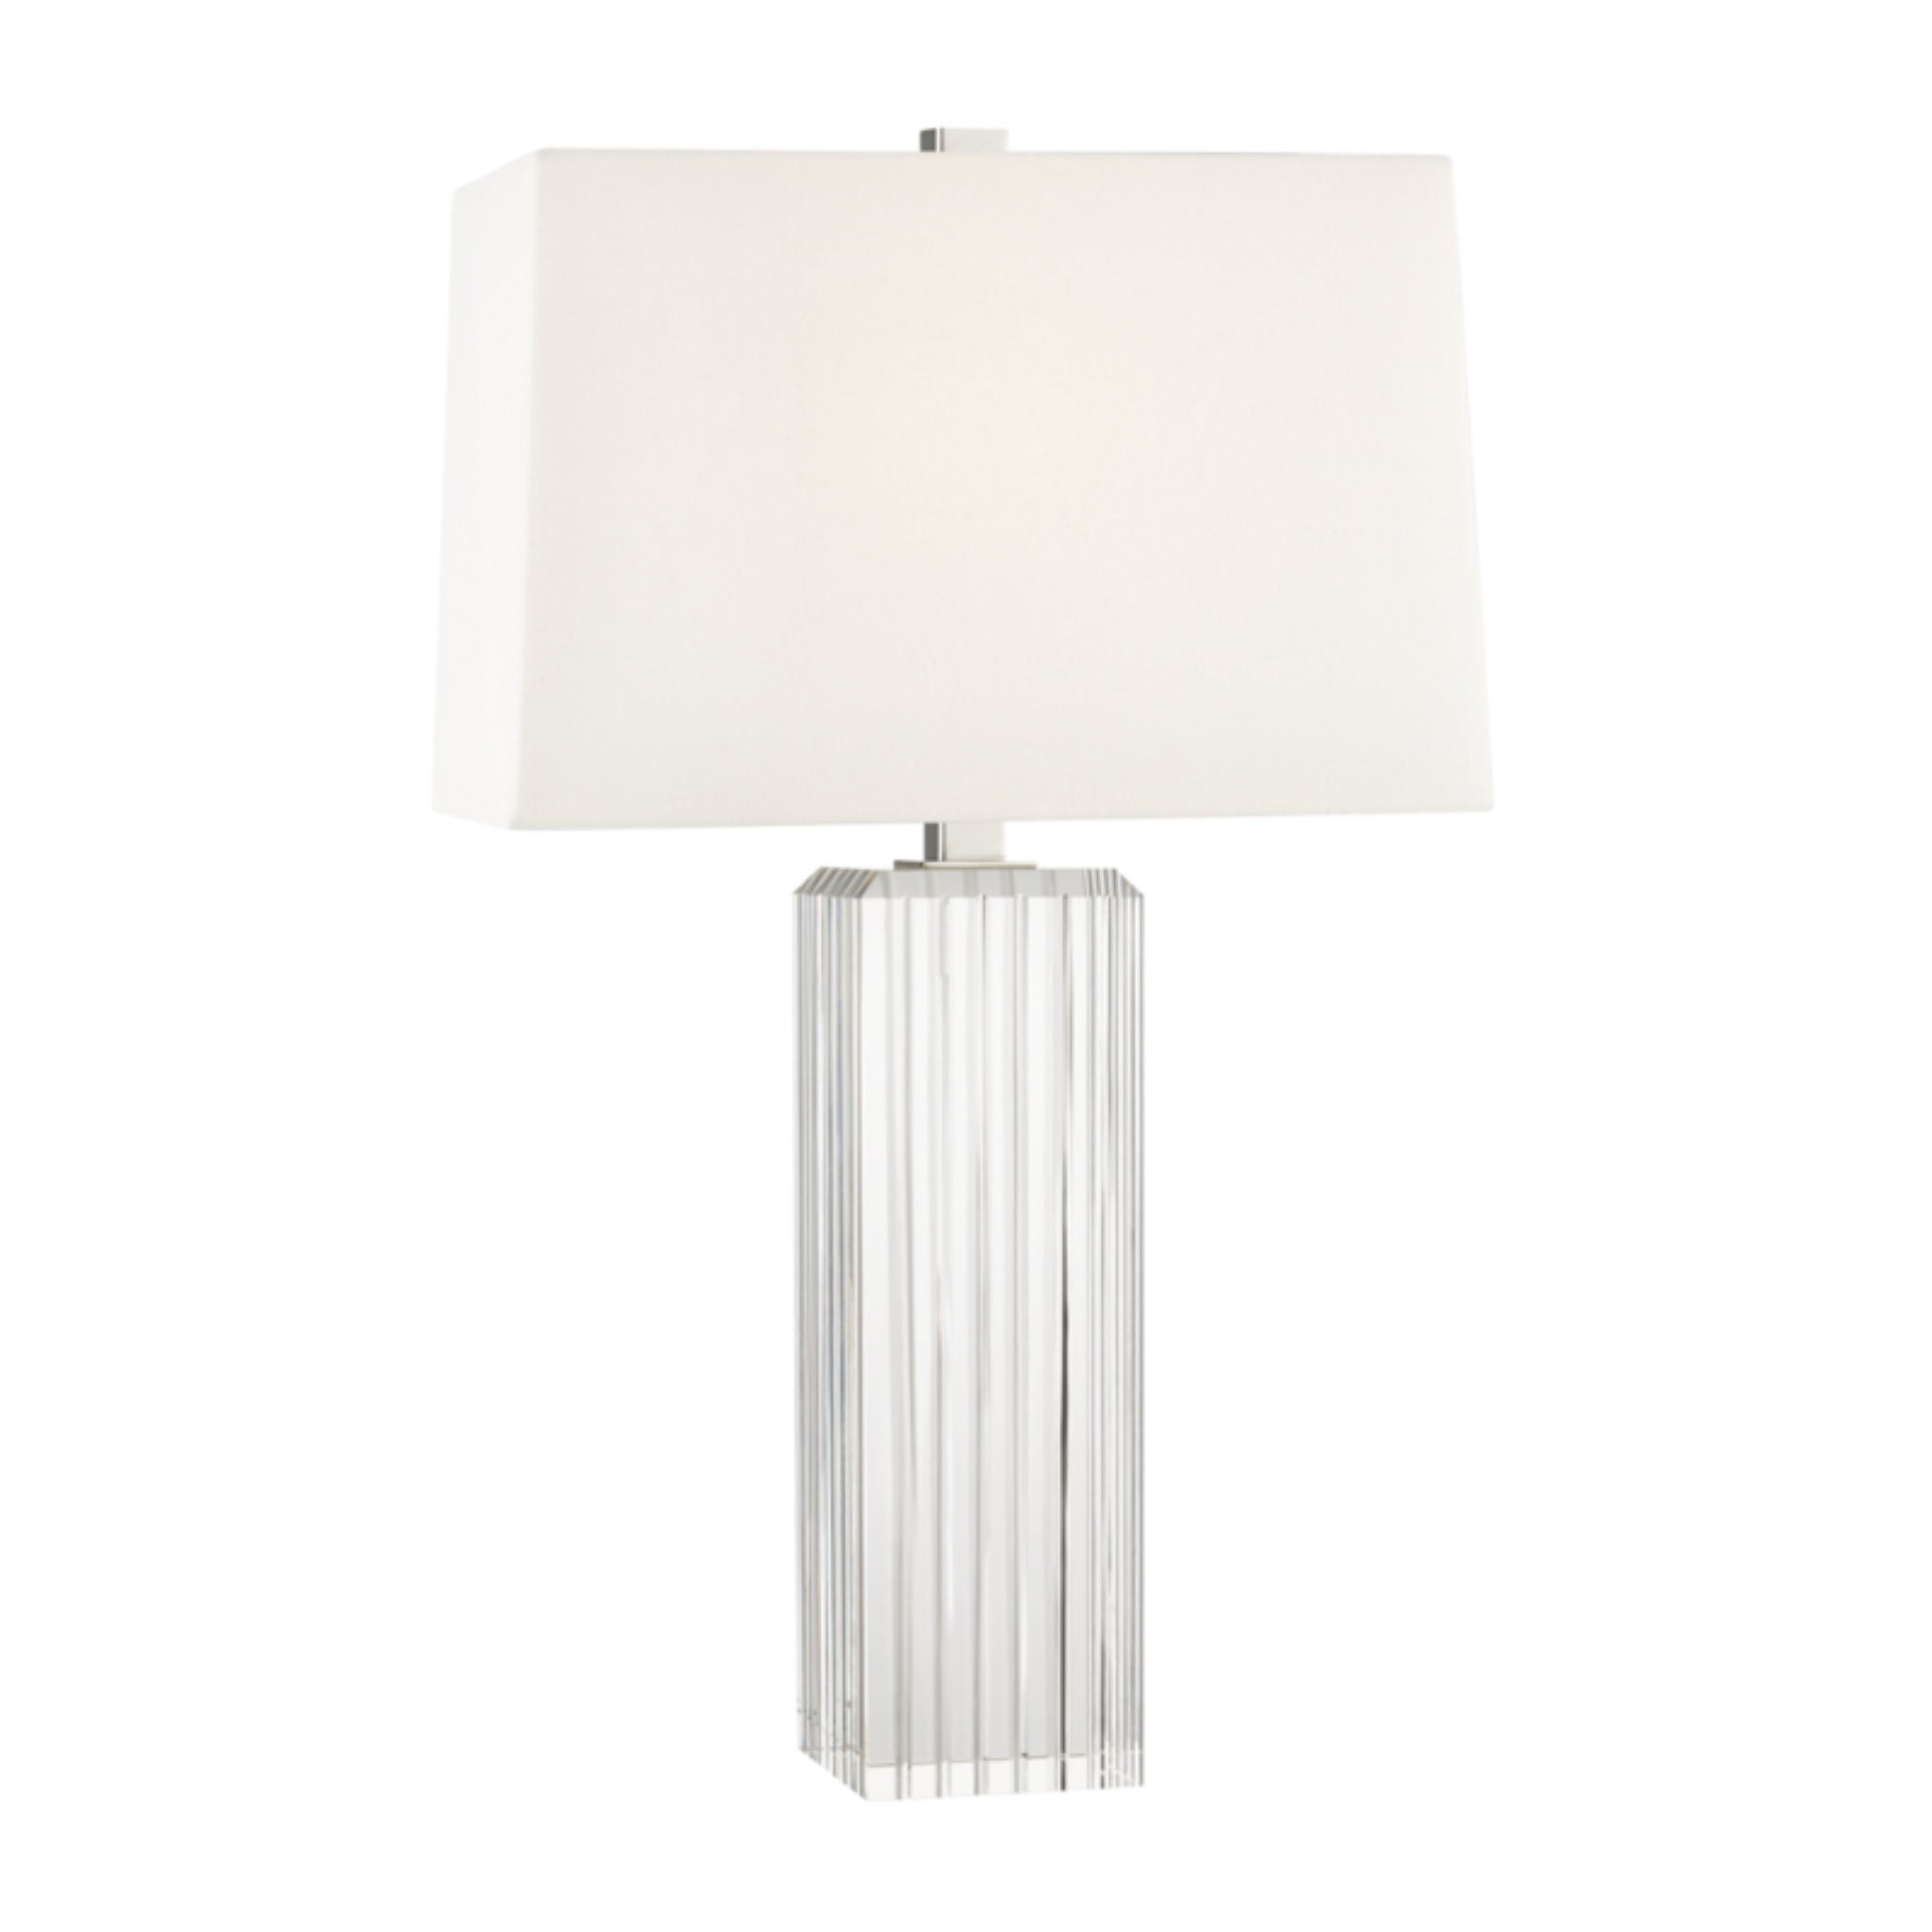 Hague 1 Light Table Lamp in Polished Nickel